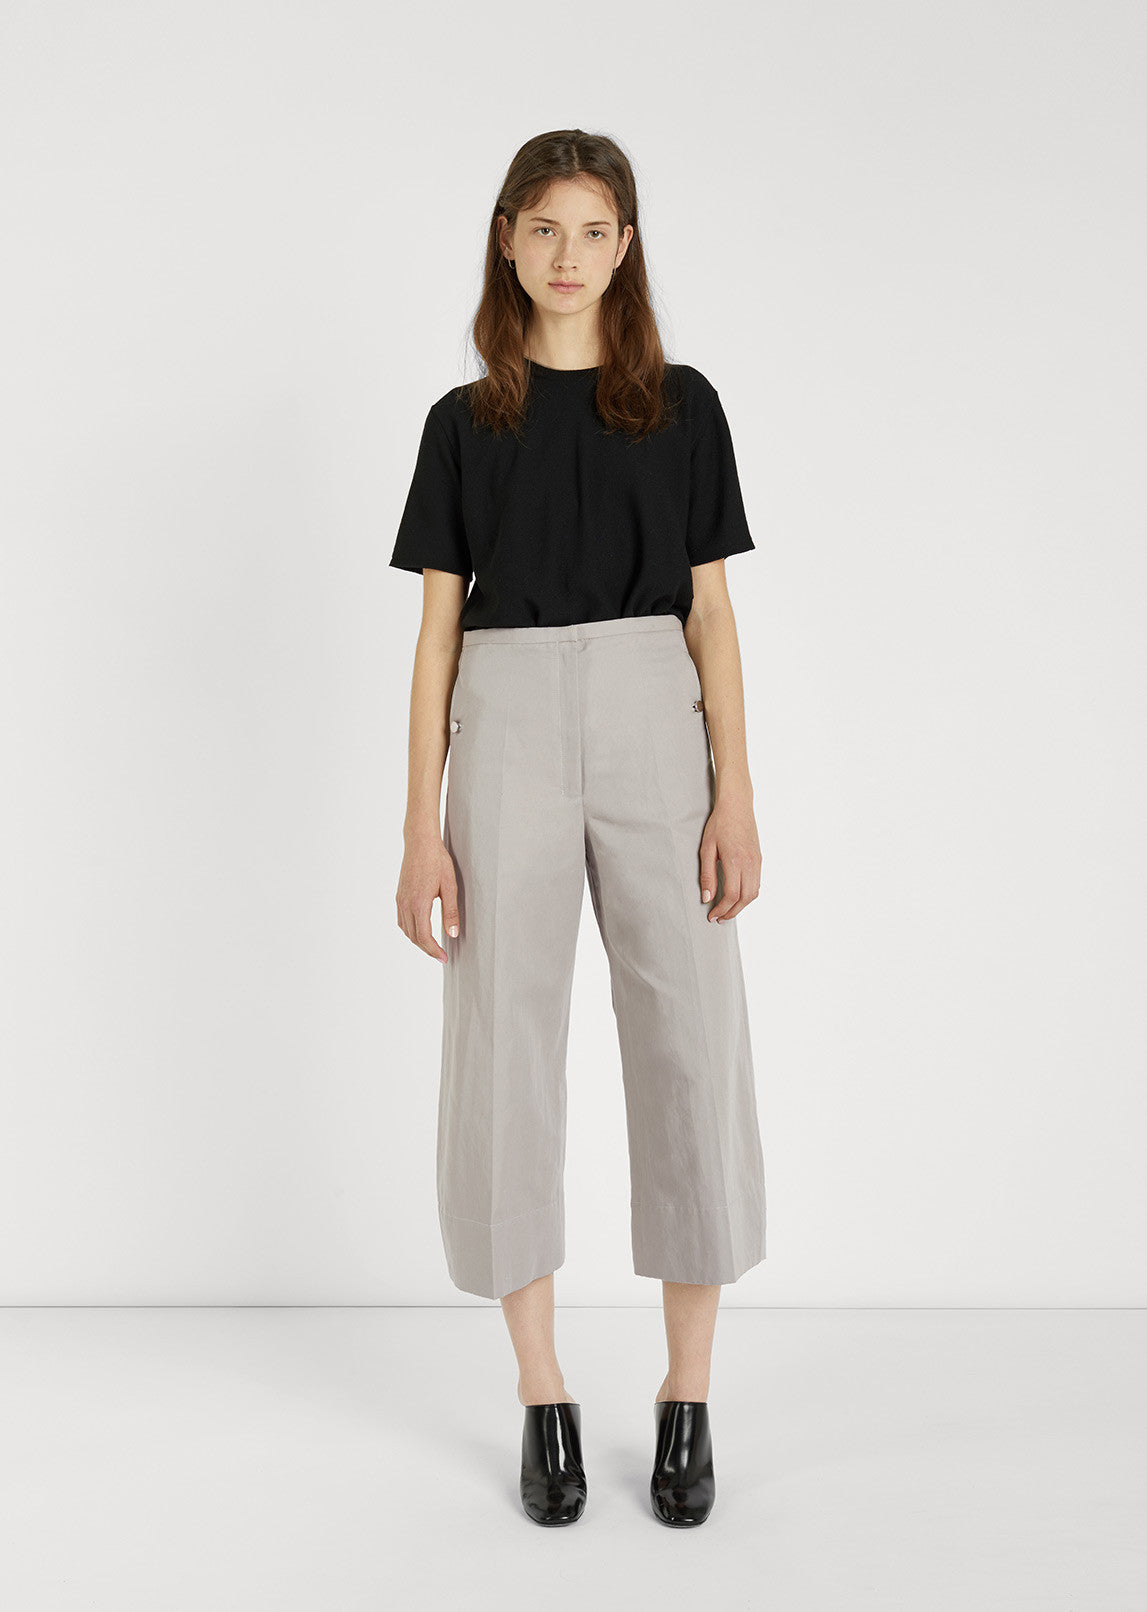 Dunnes Stores  Grey Paul Costelloe Studio Cropped Linen Trousers in Grey